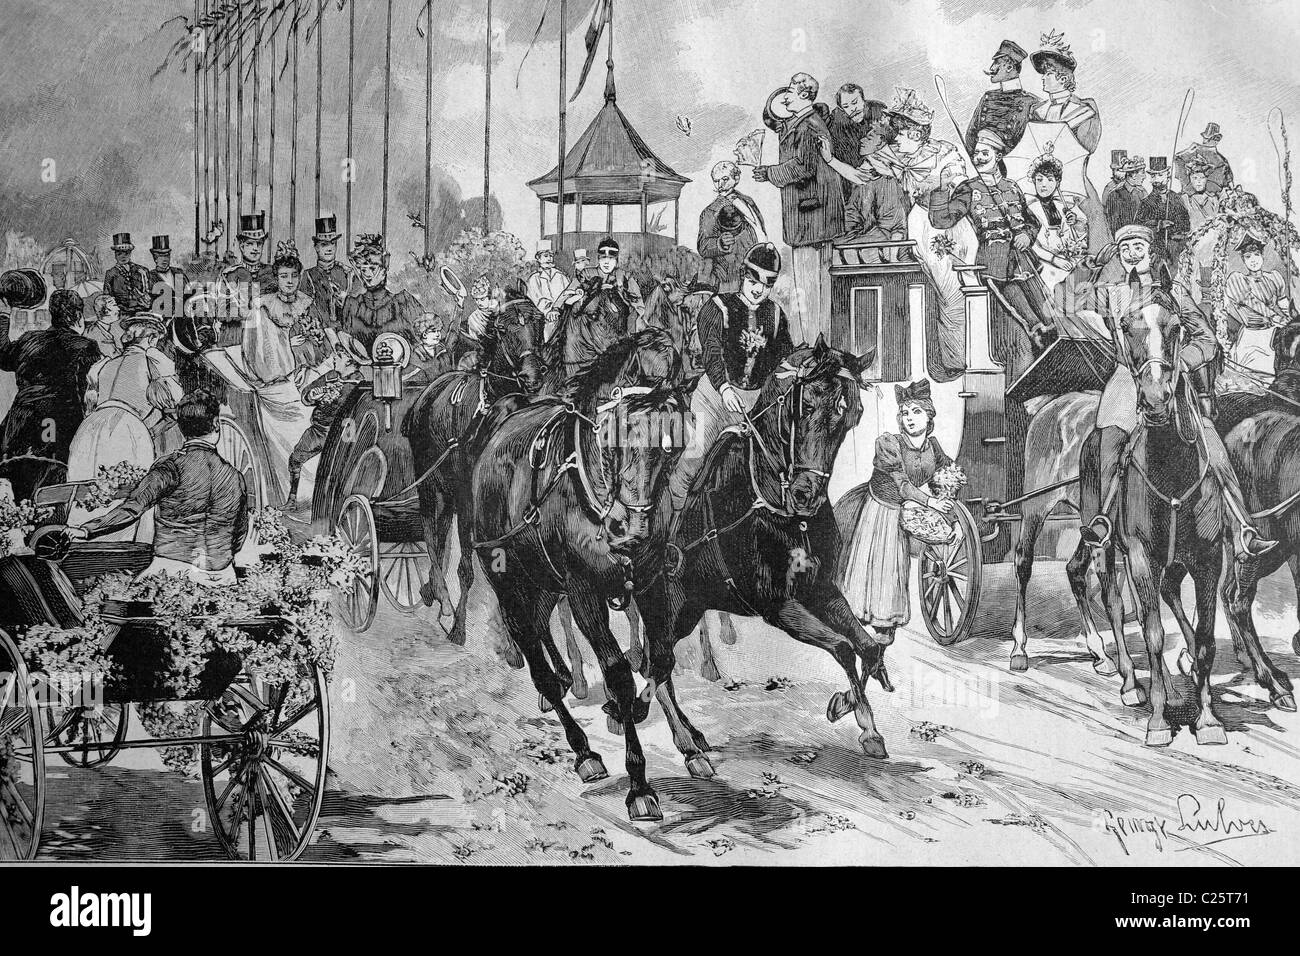 The flower parade in Westend in Berlin, Germany, historical illustration circa 1893 Stock Photo